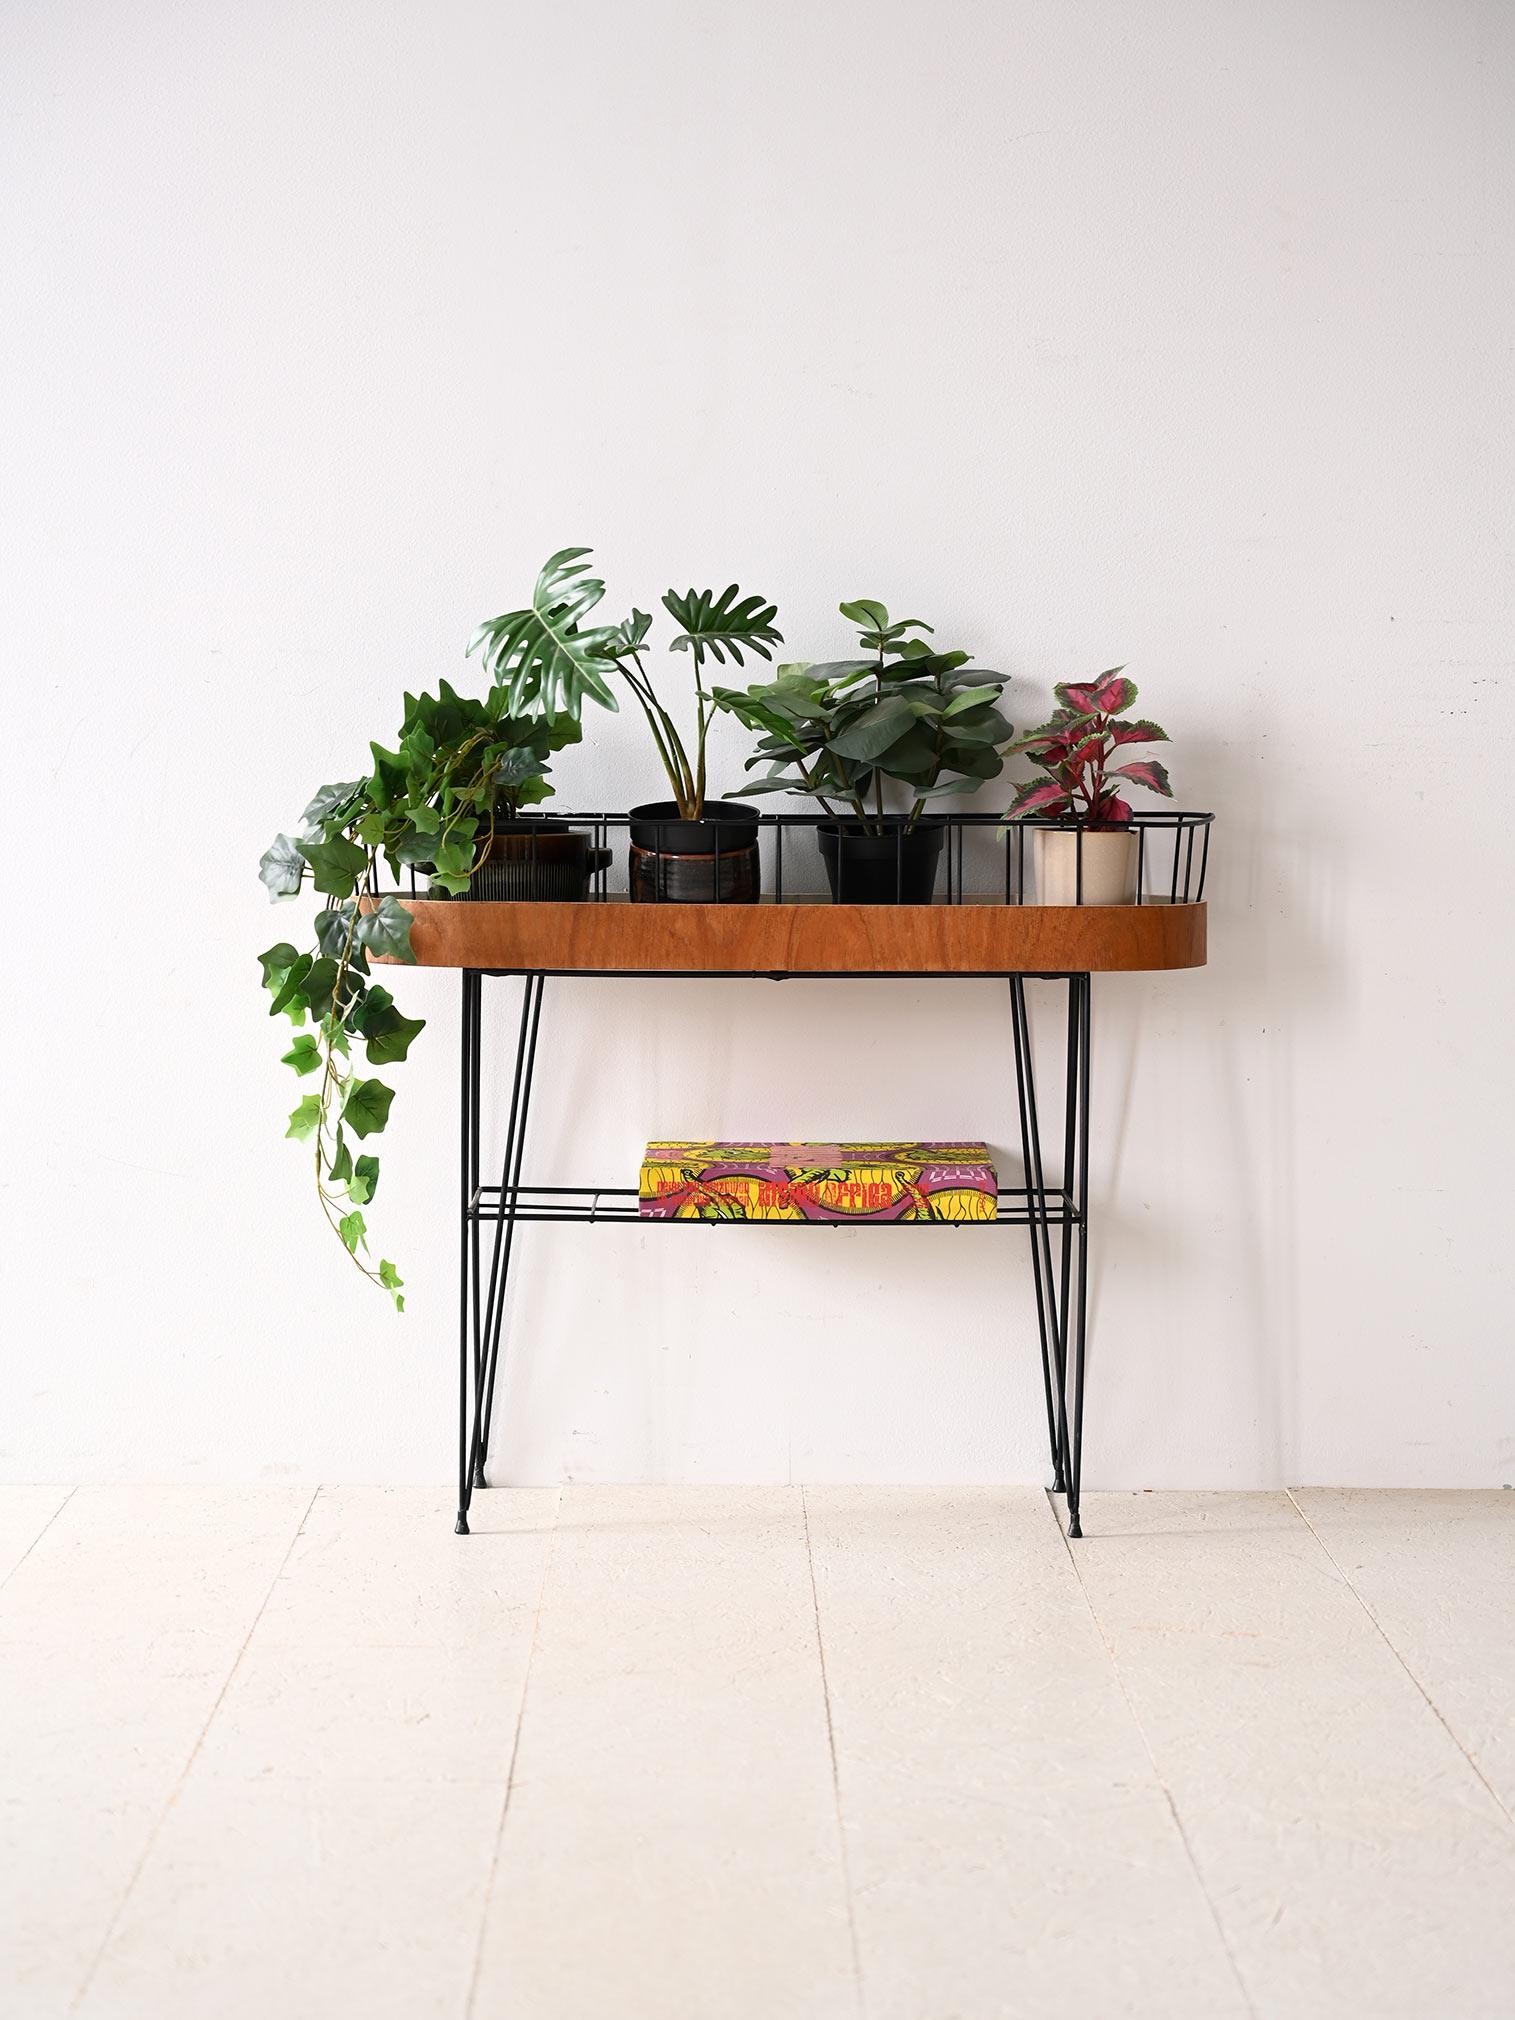 Original 1960s Scandinavian planter with metal frame.

An original piece of furniture that is ideal for keeping plants in the house but with order and style, in perfect Scandinavian style.
Consists of a black metal frame and an oval base with a